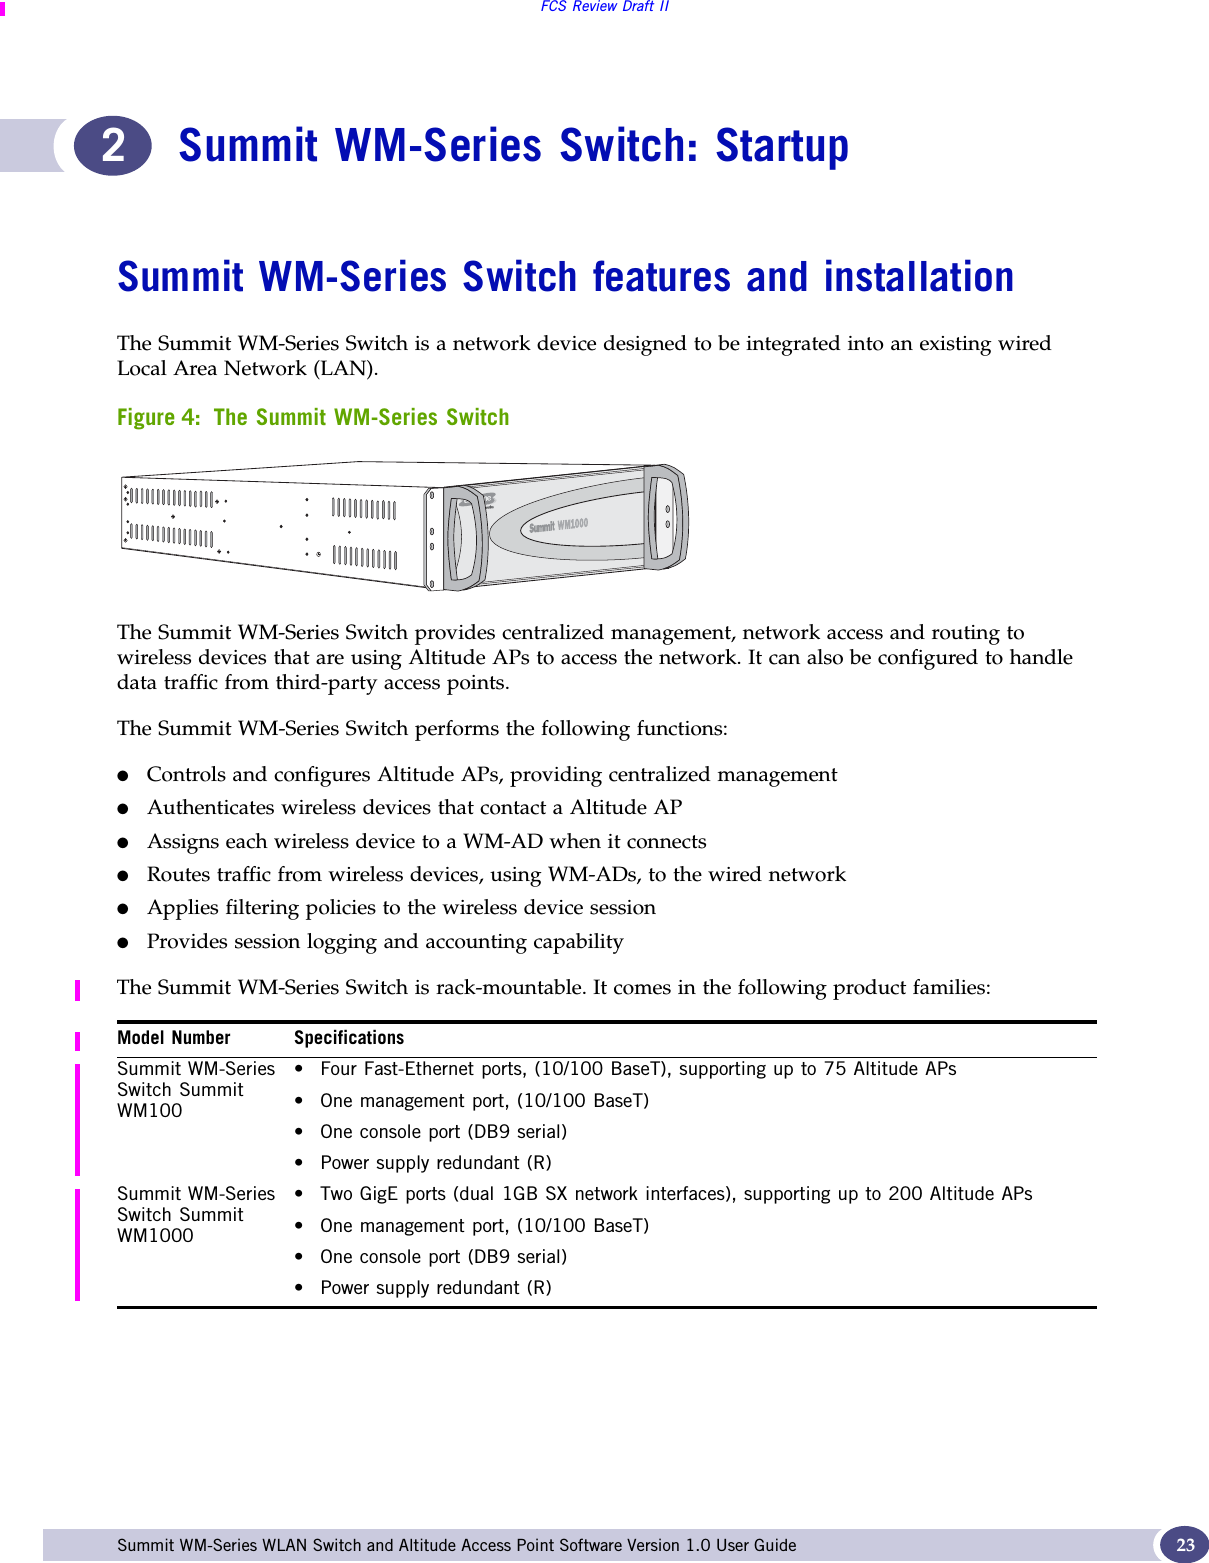 FCS Review Draft IISummit WM-Series WLAN Switch and Altitude Access Point Software Version 1.0 User Guide 232Summit WM-Series Switch: StartupSummit WM-Series Switch features and installationThe Summit WM-Series Switch is a network device designed to be integrated into an existing wired Local Area Network (LAN). Figure 4: The Summit WM-Series SwitchThe Summit WM-Series Switch provides centralized management, network access and routing to wireless devices that are using Altitude APs to access the network. It can also be configured to handle data traffic from third-party access points.The Summit WM-Series Switch performs the following functions:●Controls and configures Altitude APs, providing centralized management●Authenticates wireless devices that contact a Altitude AP●Assigns each wireless device to a WM-AD when it connects●Routes traffic from wireless devices, using WM-ADs, to the wired network●Applies filtering policies to the wireless device session●Provides session logging and accounting capabilityThe Summit WM-Series Switch is rack-mountable. It comes in the following product families:Model Number SpecificationsSummit WM-Series Switch Summit WM100• Four Fast-Ethernet ports, (10/100 BaseT), supporting up to 75 Altitude APs• One management port, (10/100 BaseT)• One console port (DB9 serial)• Power supply redundant (R)Summit WM-Series Switch Summit WM1000• Two GigE ports (dual 1GB SX network interfaces), supporting up to 200 Altitude APs• One management port, (10/100 BaseT)• One console port (DB9 serial) • Power supply redundant (R)